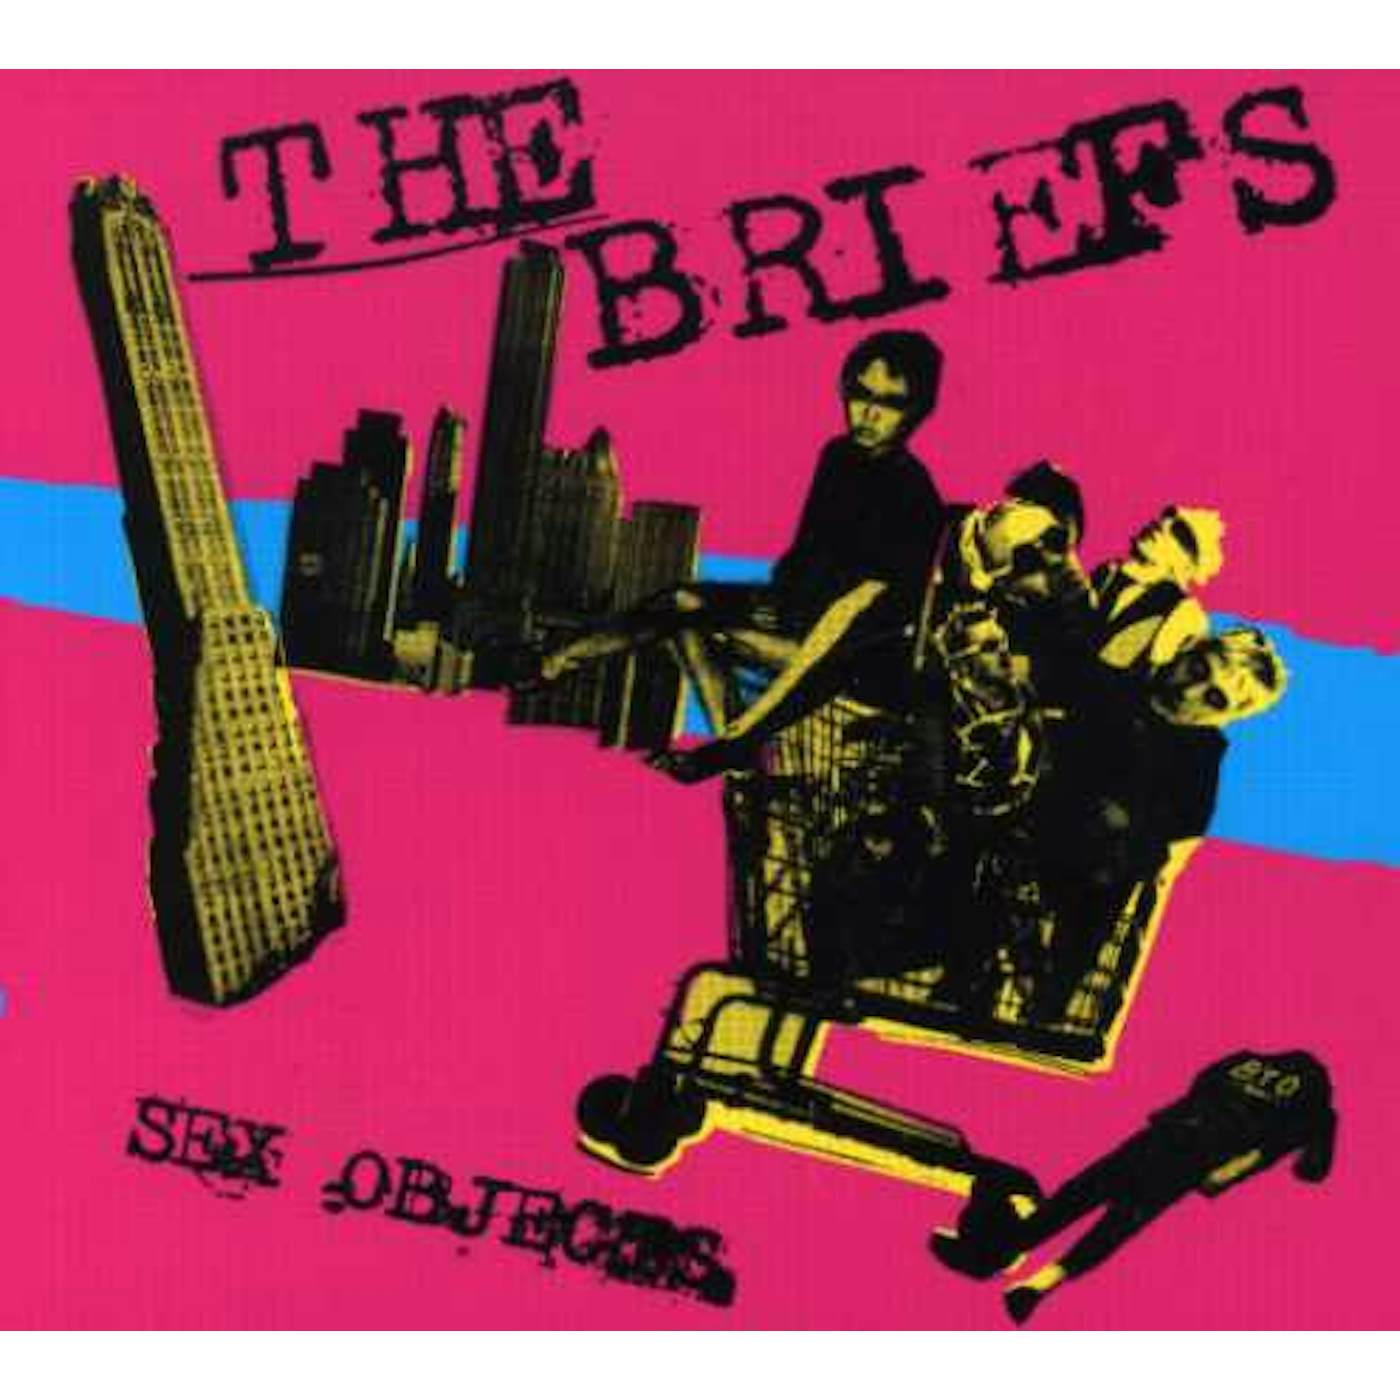 The Briefs SEX OBJECTS CD